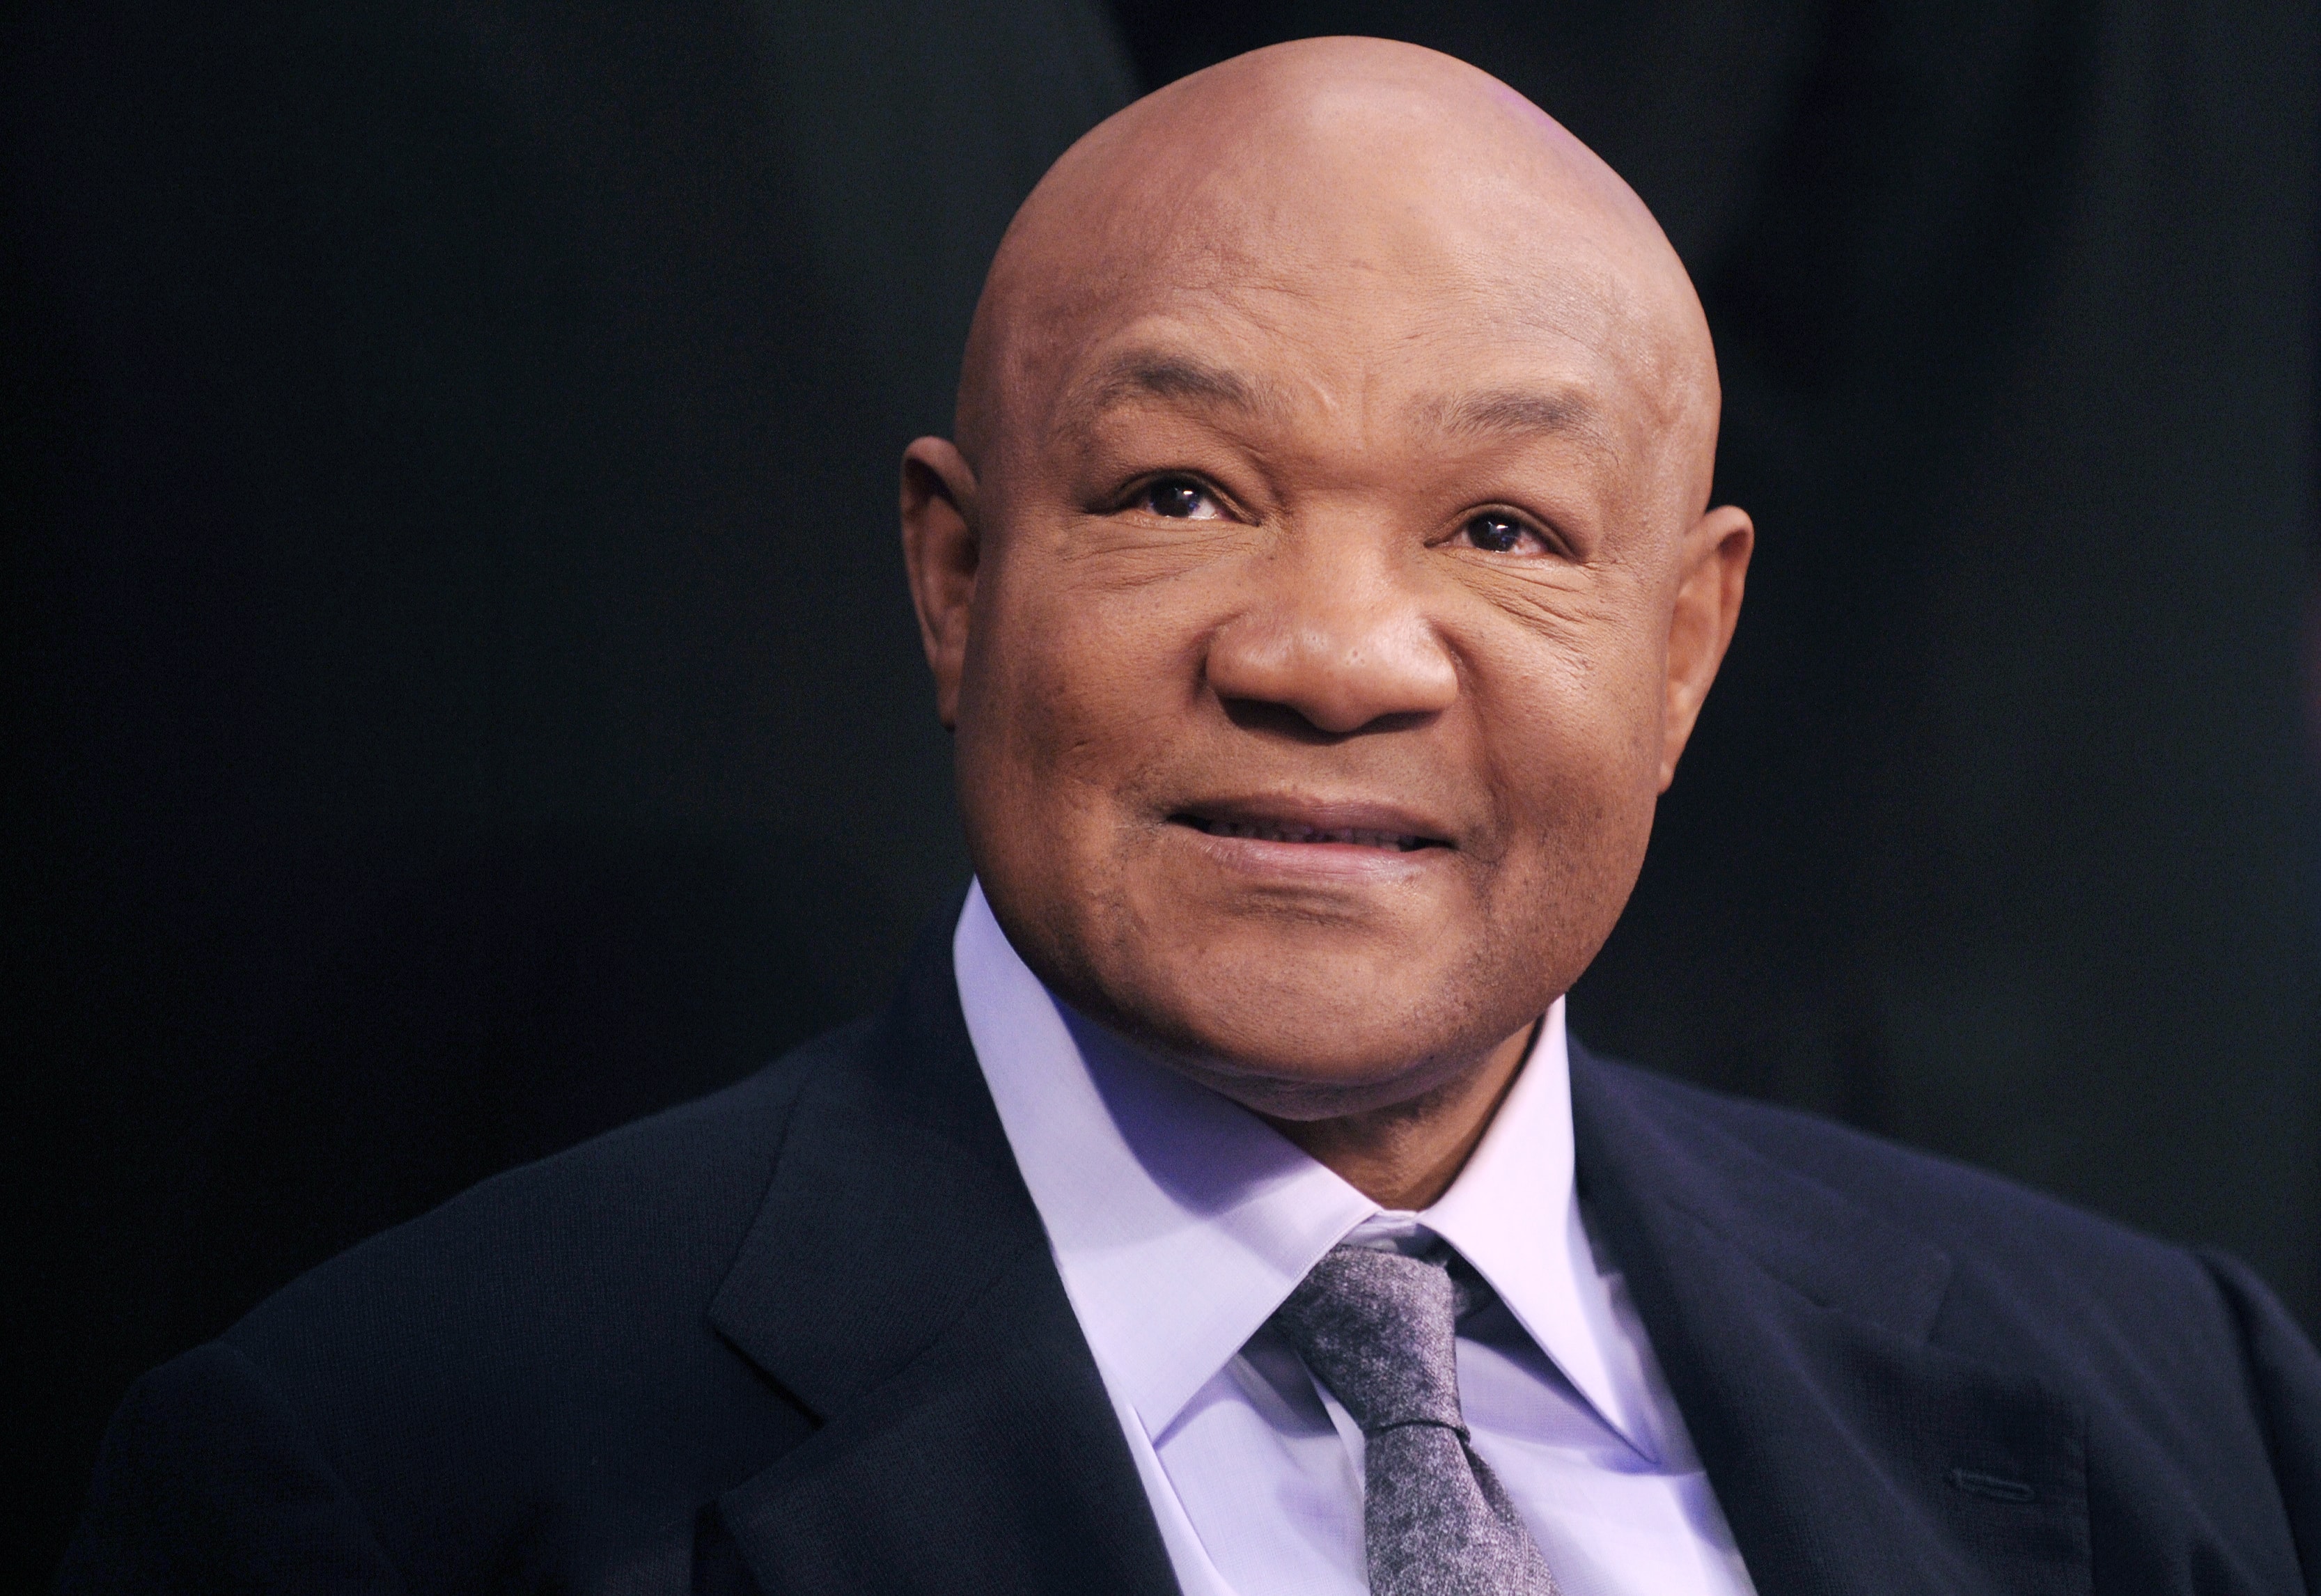 Foreman's Net Worth From Heavyweight Boxer to Entrepreneur